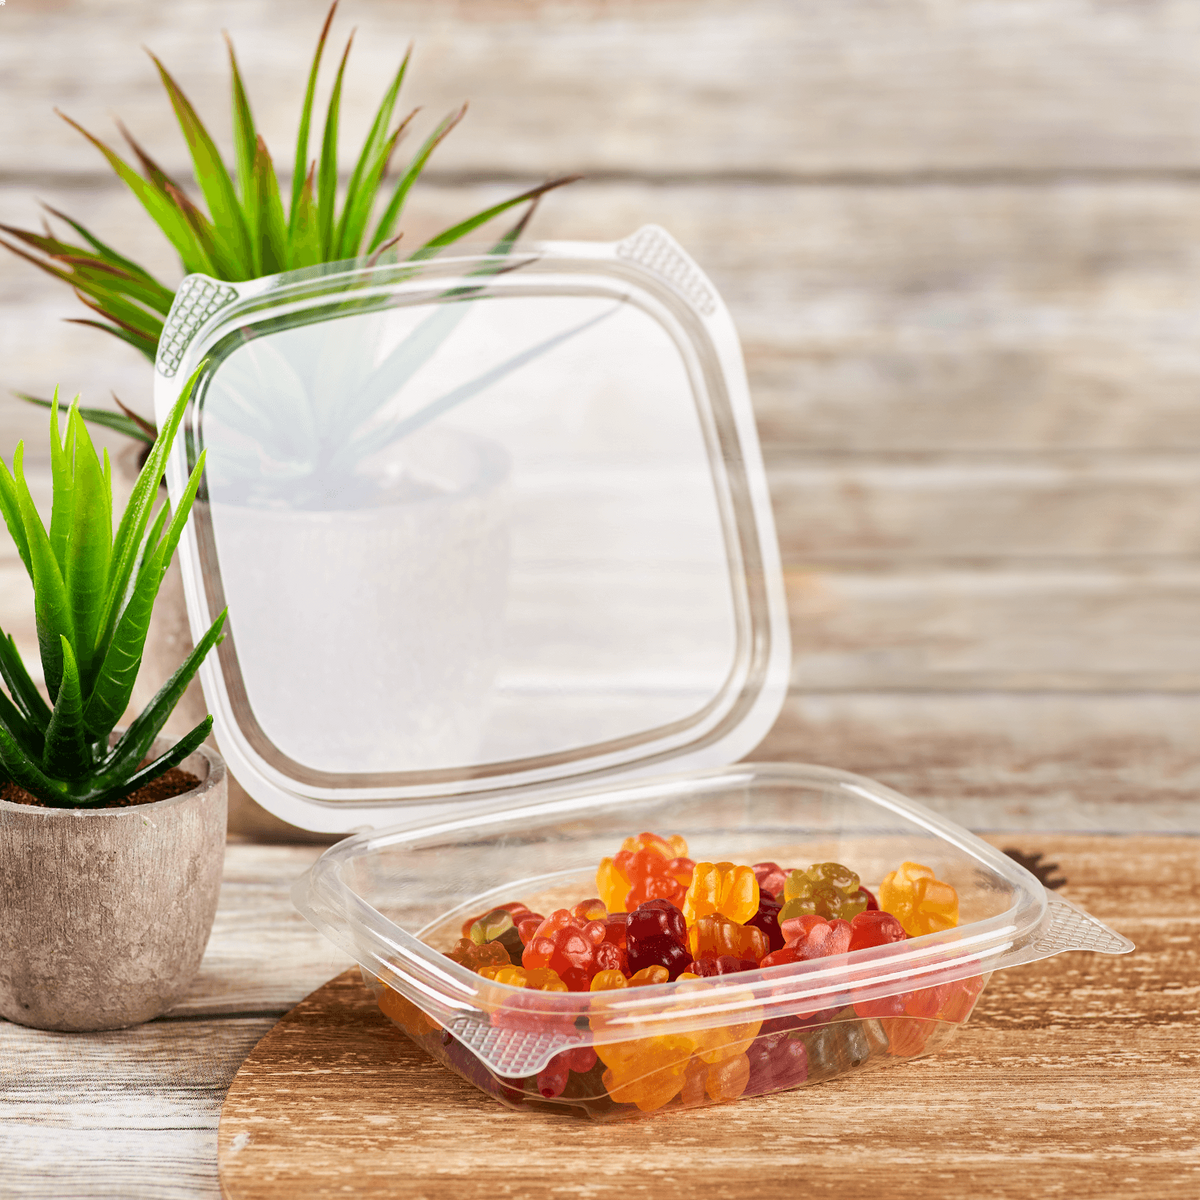 https://www.restaurantsupplydrops.shop/wp-content/uploads/1689/33/shop-at-8oz-hinged-deli-containers-small-hinged-deli-box-200-count-karat-today-you-can-shop-the-latest-fashions-and-brand-names-online_4.png